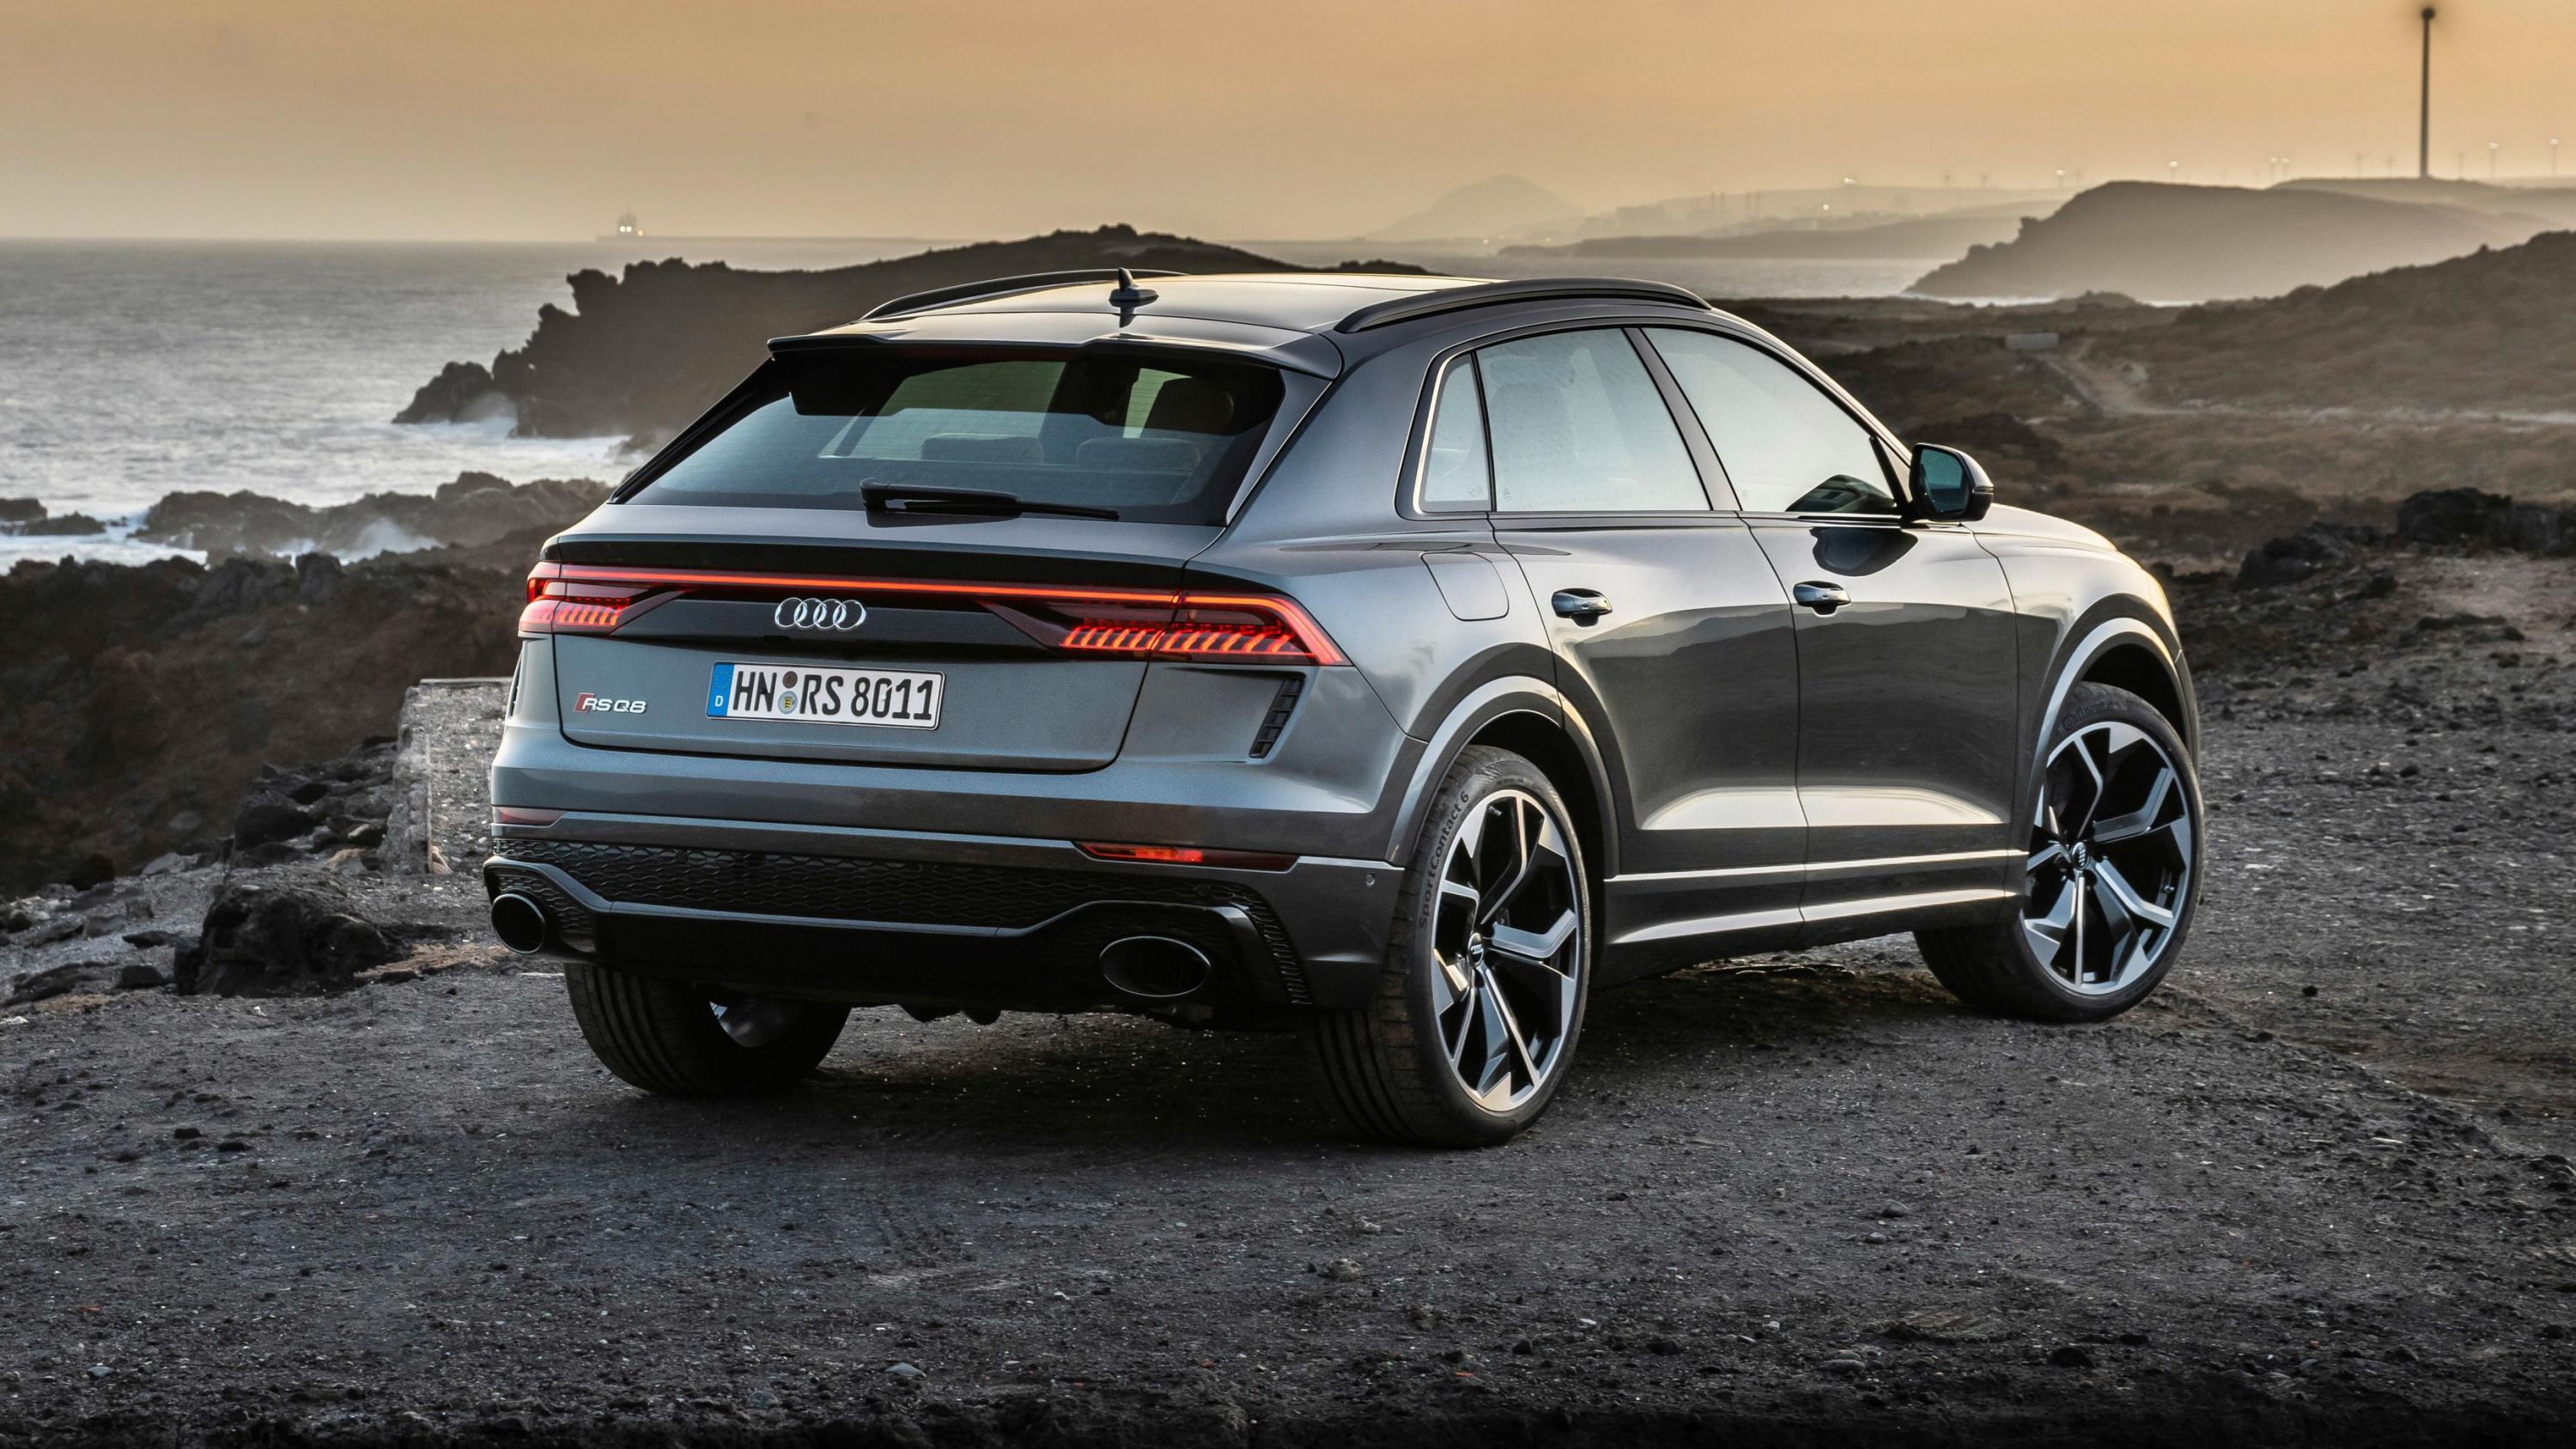 2020 Audi RSQ8 price and specs | CarExpert